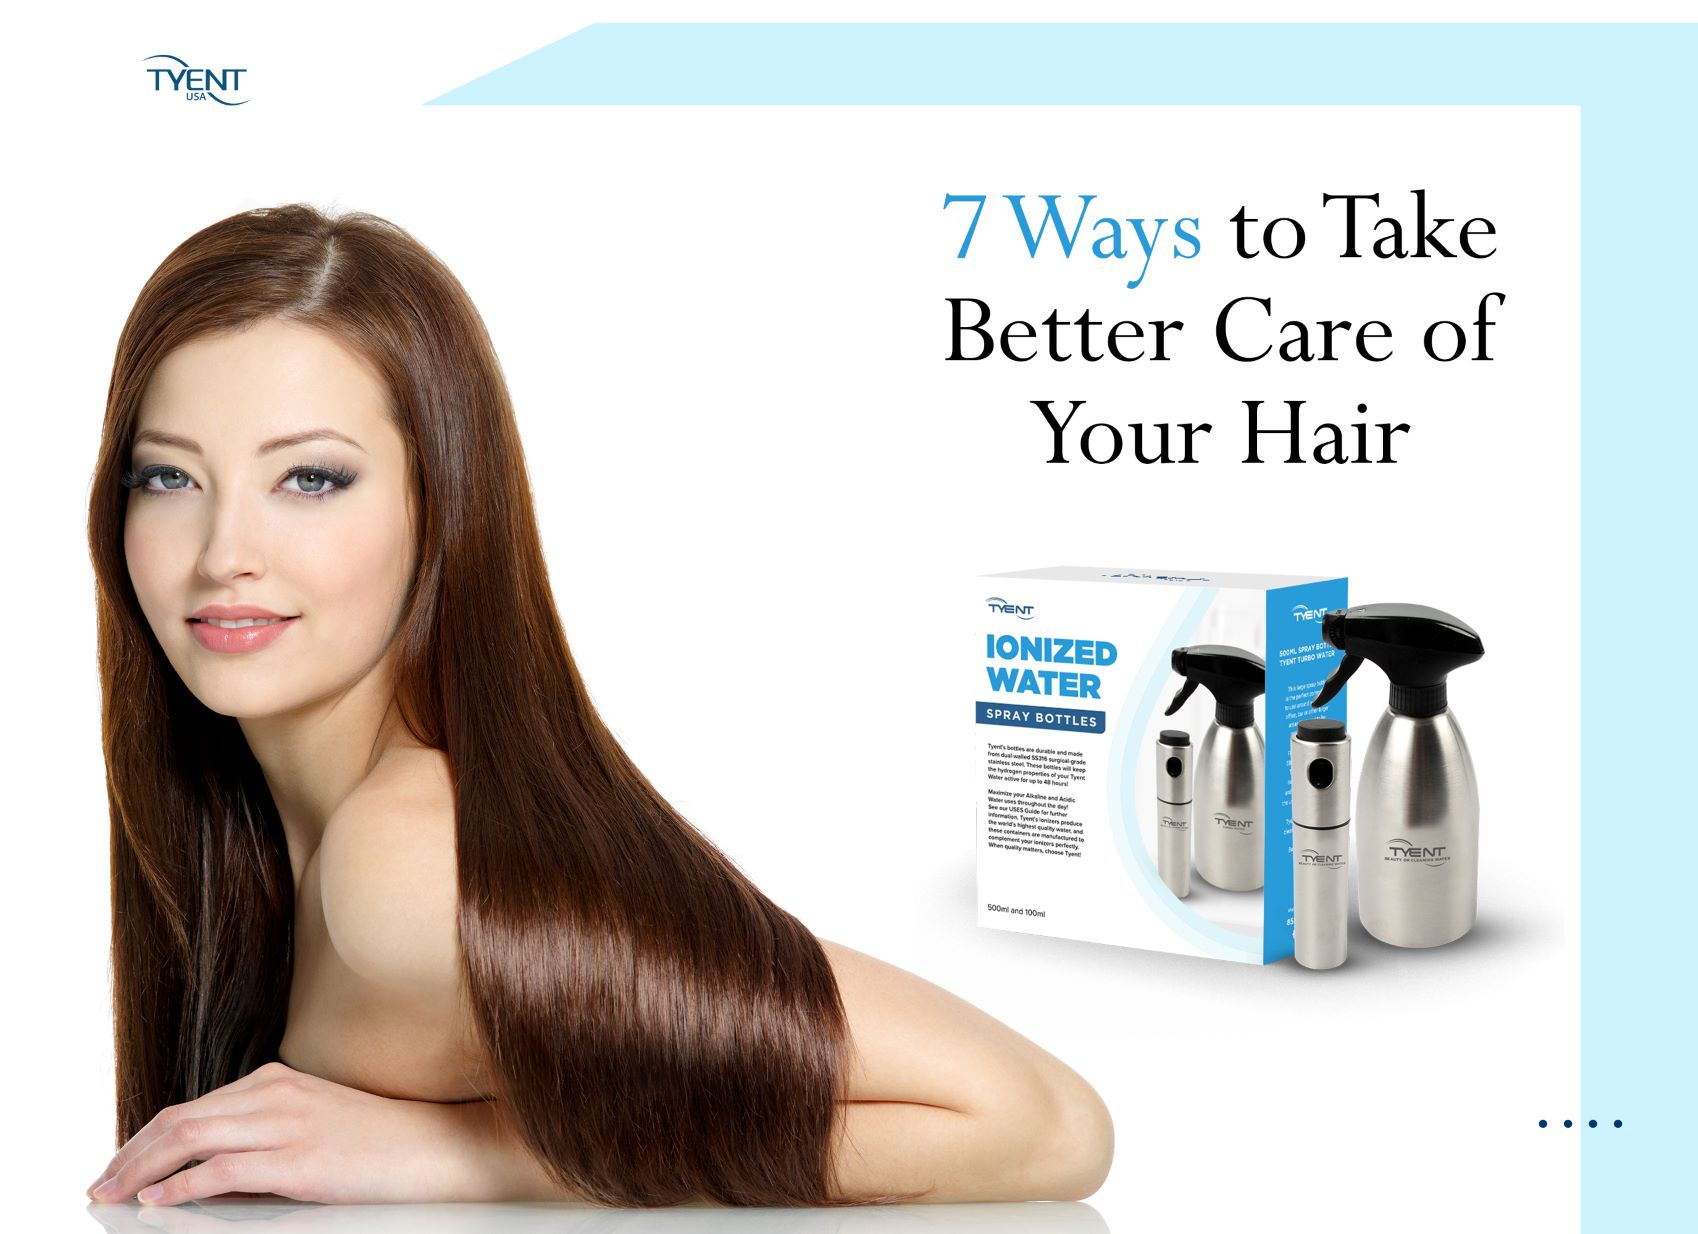 7 Ways to Take Better Care of Your Hair